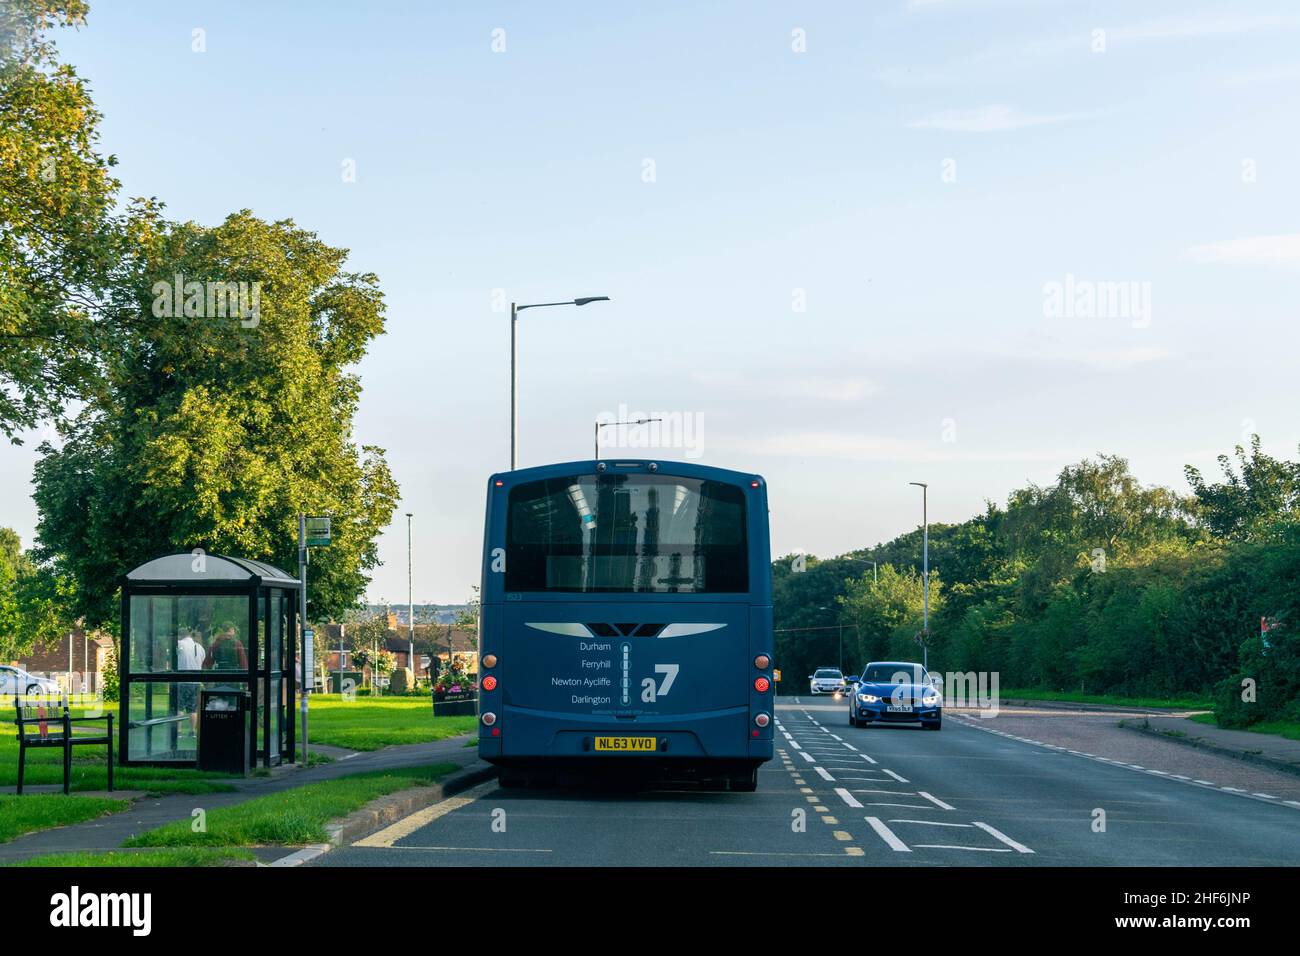 23rd August 2019 - Durham, UK: British bus travelling to Middlesbrough via Stockton pulls over at a bus stop, cars behind have to wait due to on comin Stock Photo